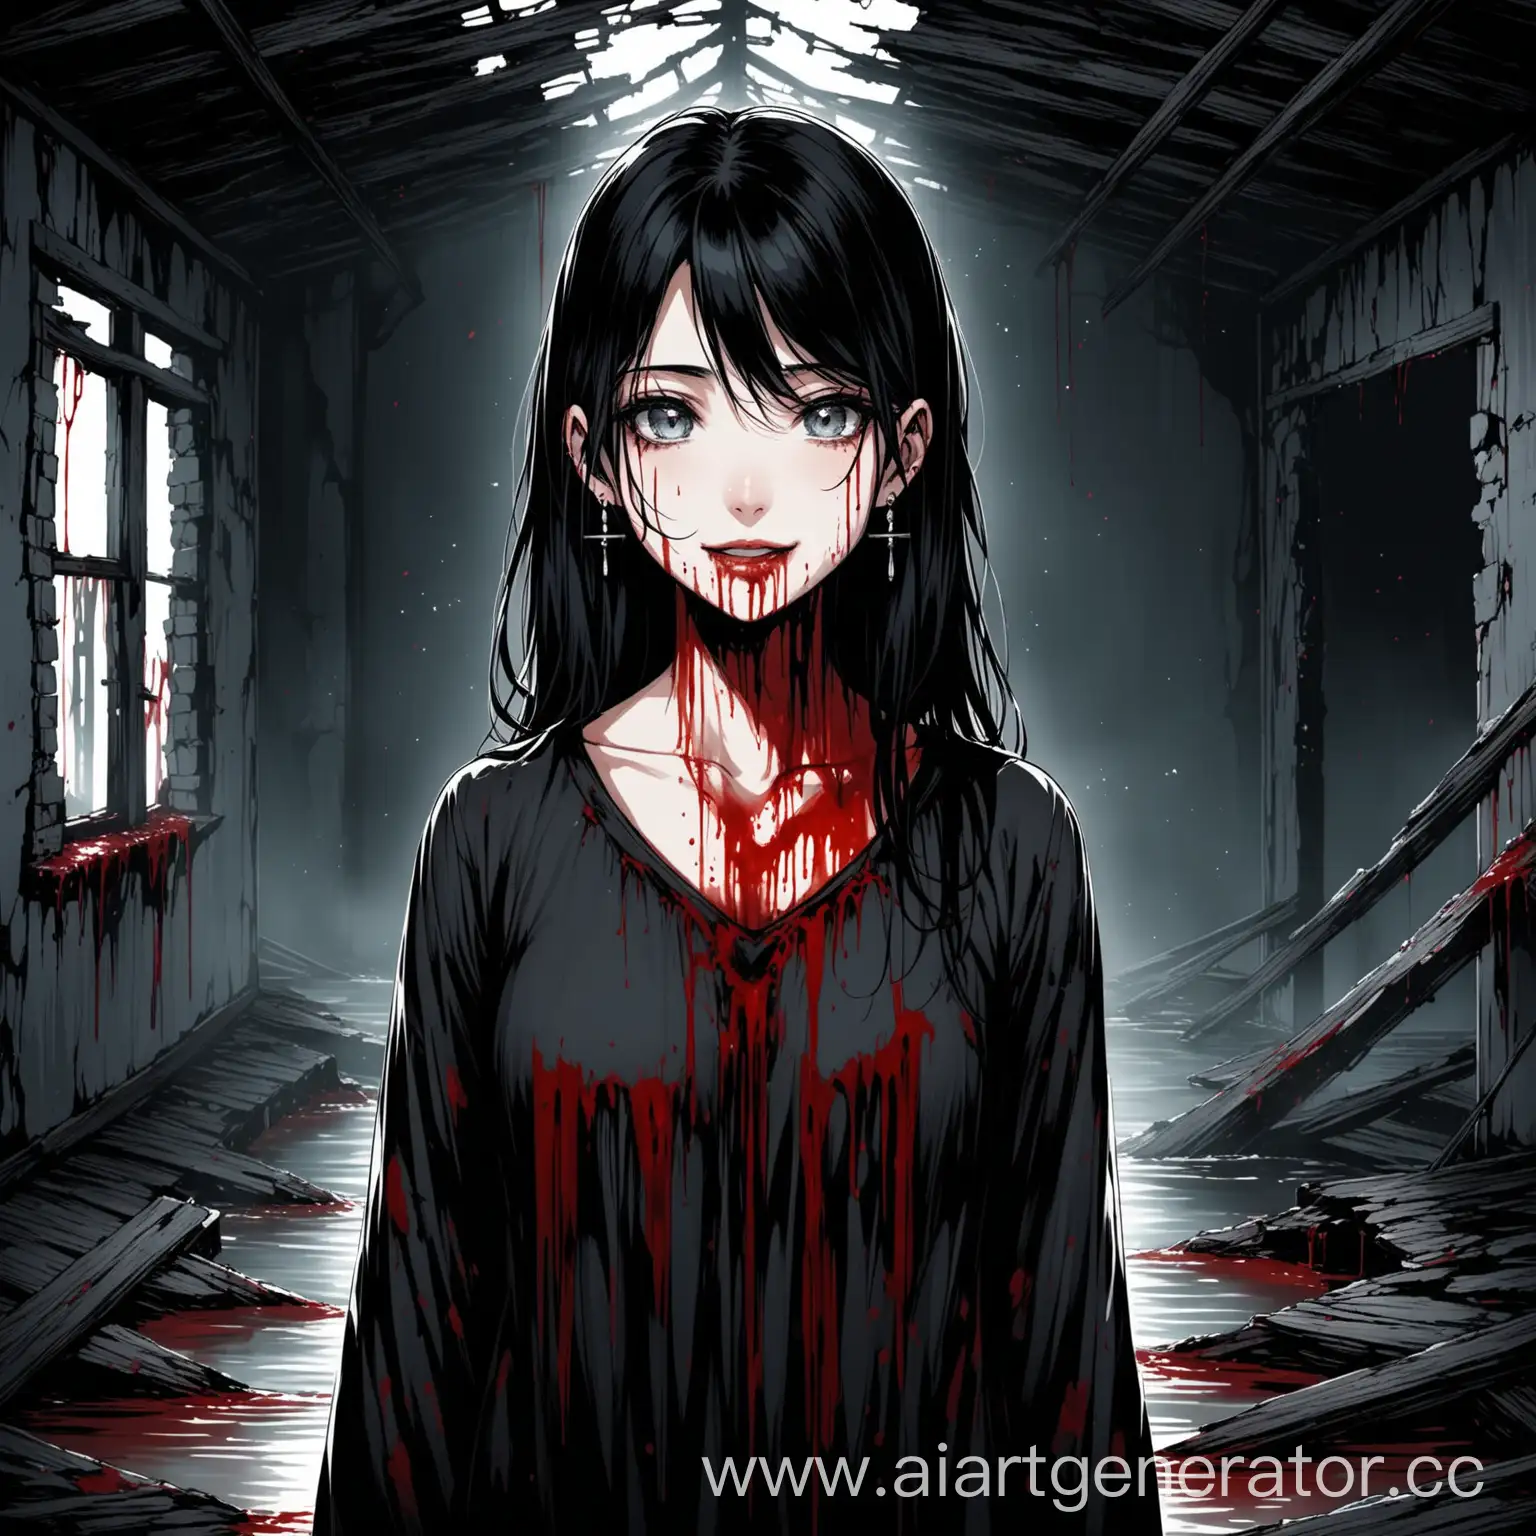 Eerie-BlackHaired-Girl-with-Empty-Eyes-Smiling-Amidst-Ruins-and-Blood